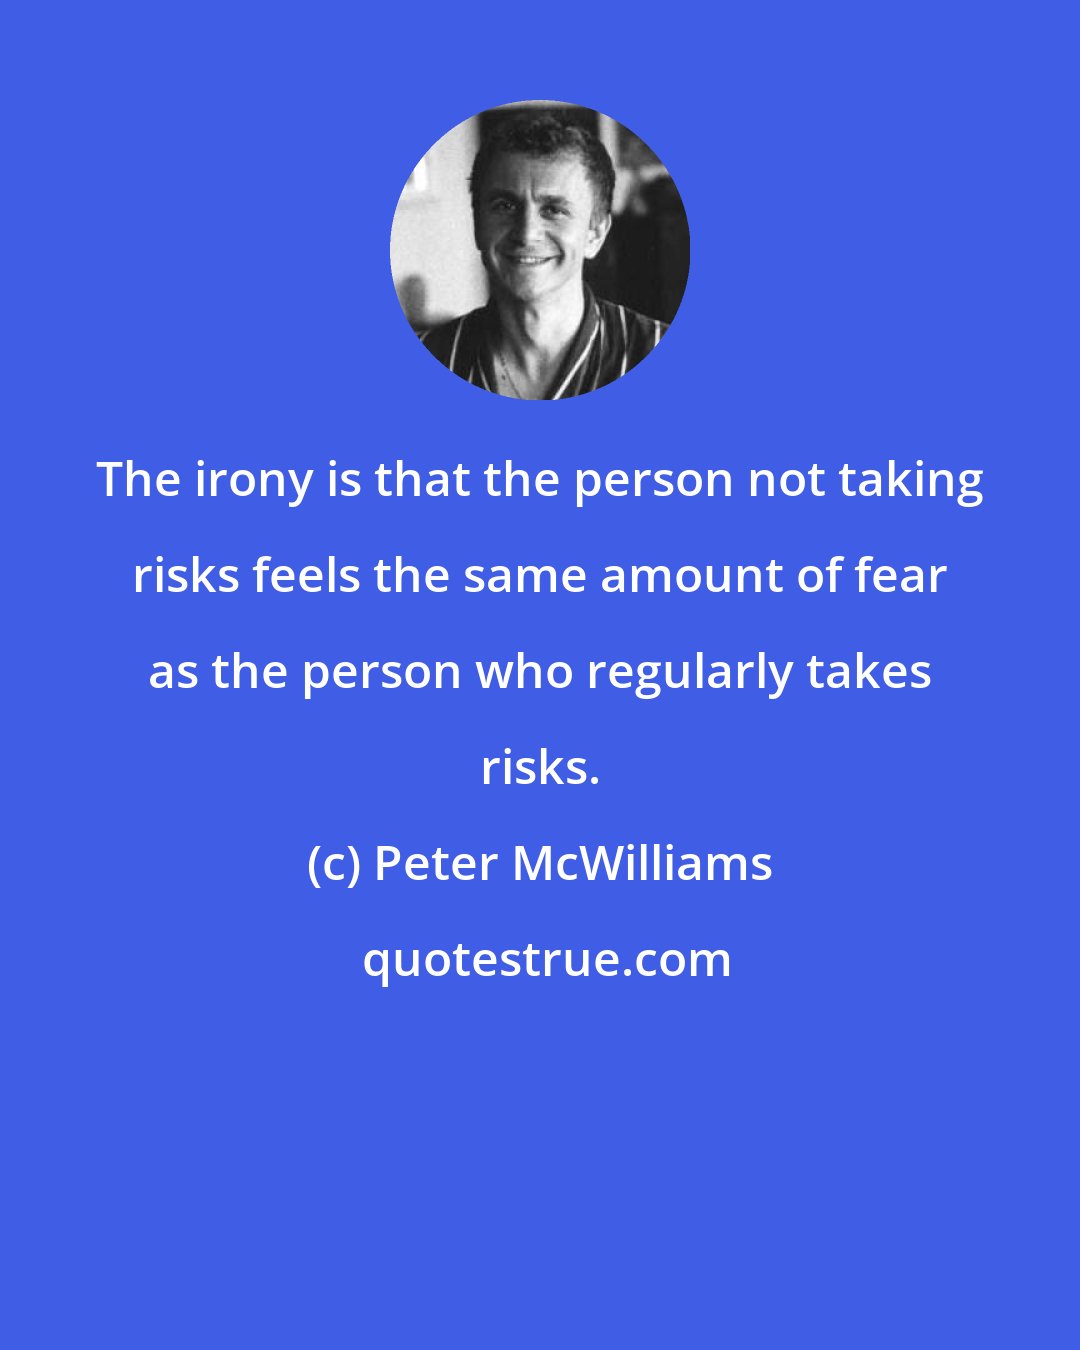 Peter McWilliams: The irony is that the person not taking risks feels the same amount of fear as the person who regularly takes risks.